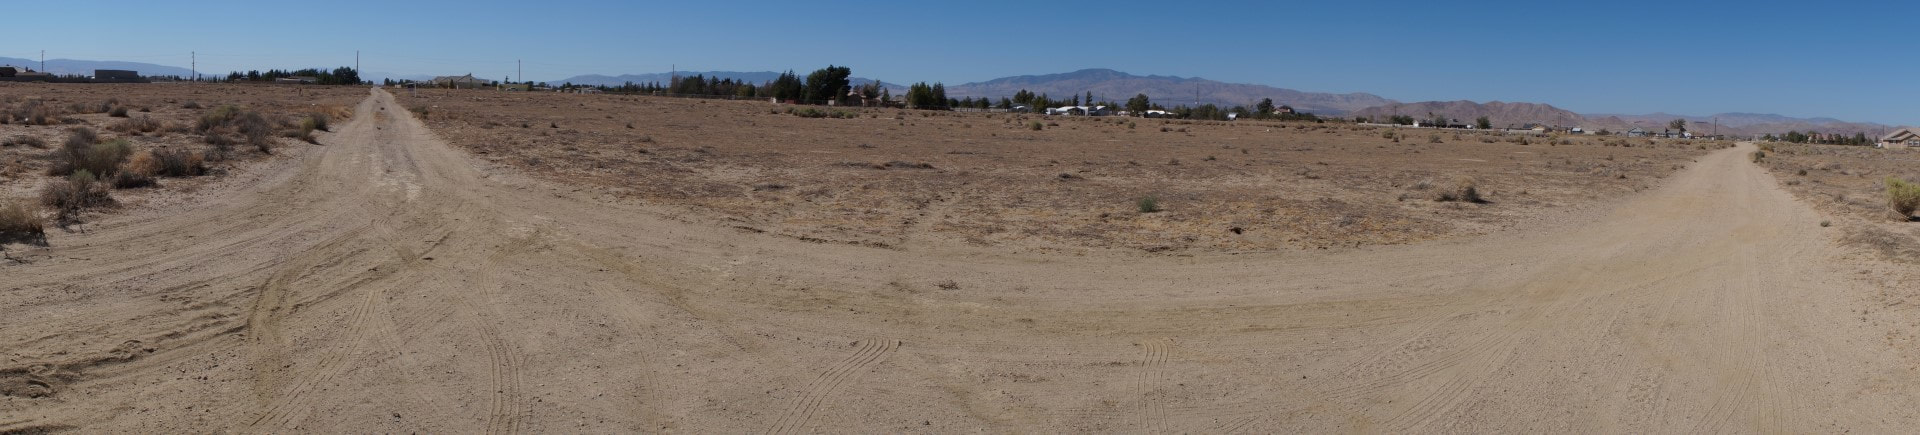 Avenue A4, 67th St West, Lancaster, CA 93536 - Panoramic